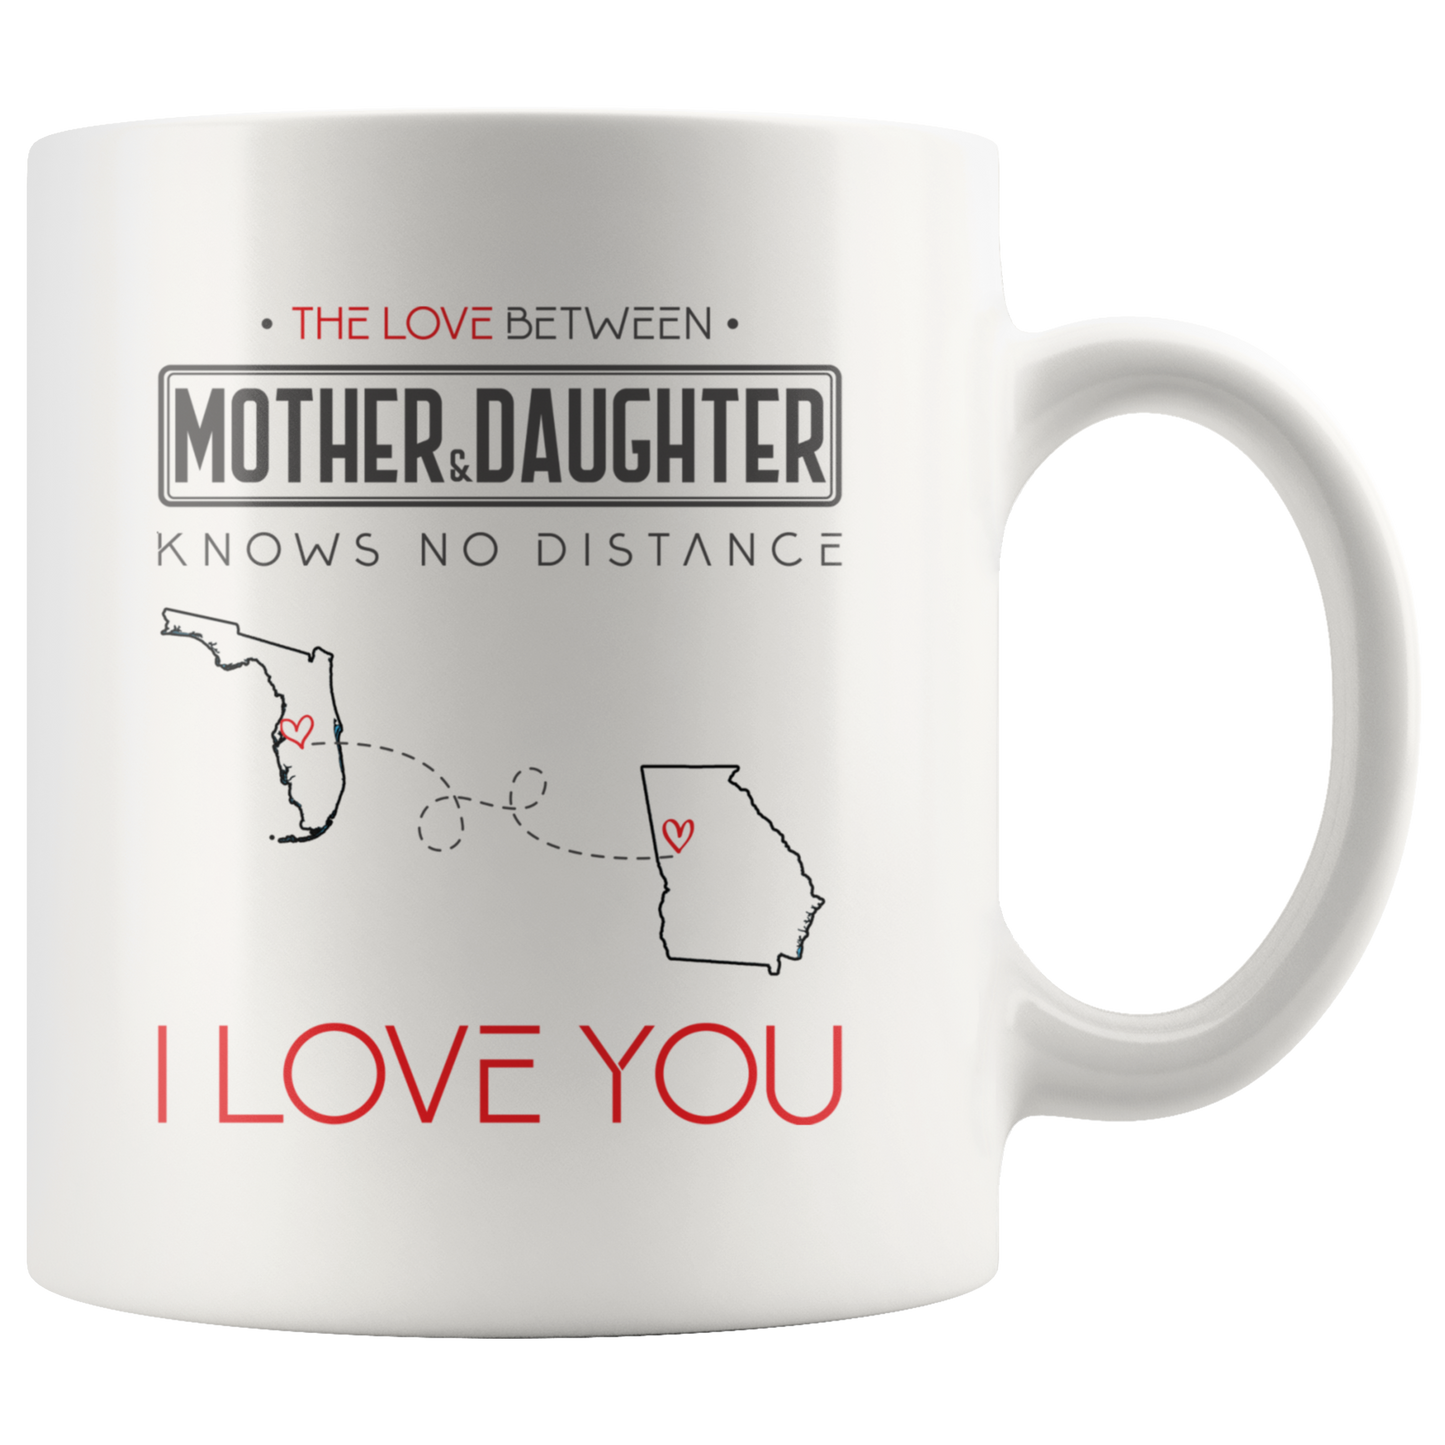 ND-21314071-sp-24139 - [ Florida | Georgia ]Mom And Daughter Accent Mug 11 oz Red - The Love Between Mot